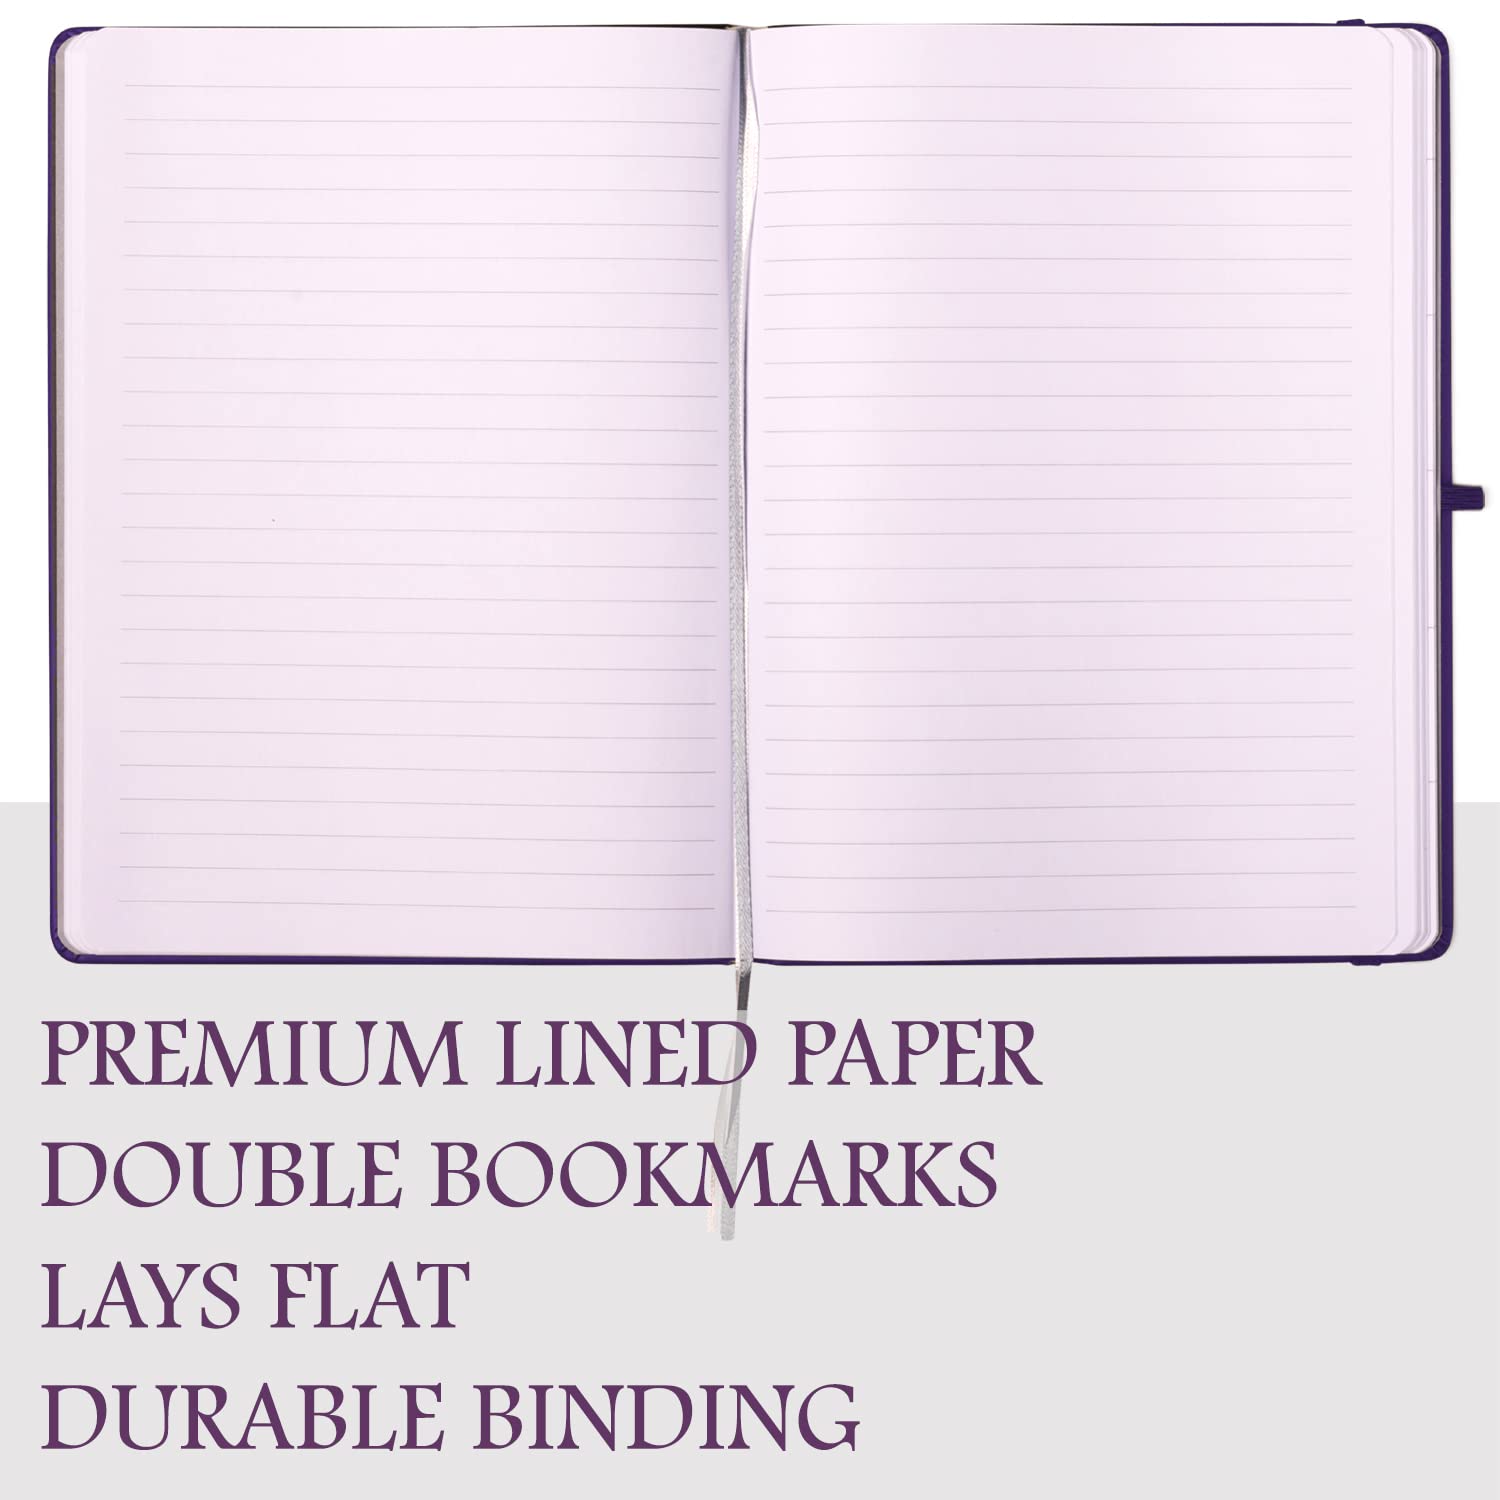 192 Pages Cream Lined Paper Journal Eggplant